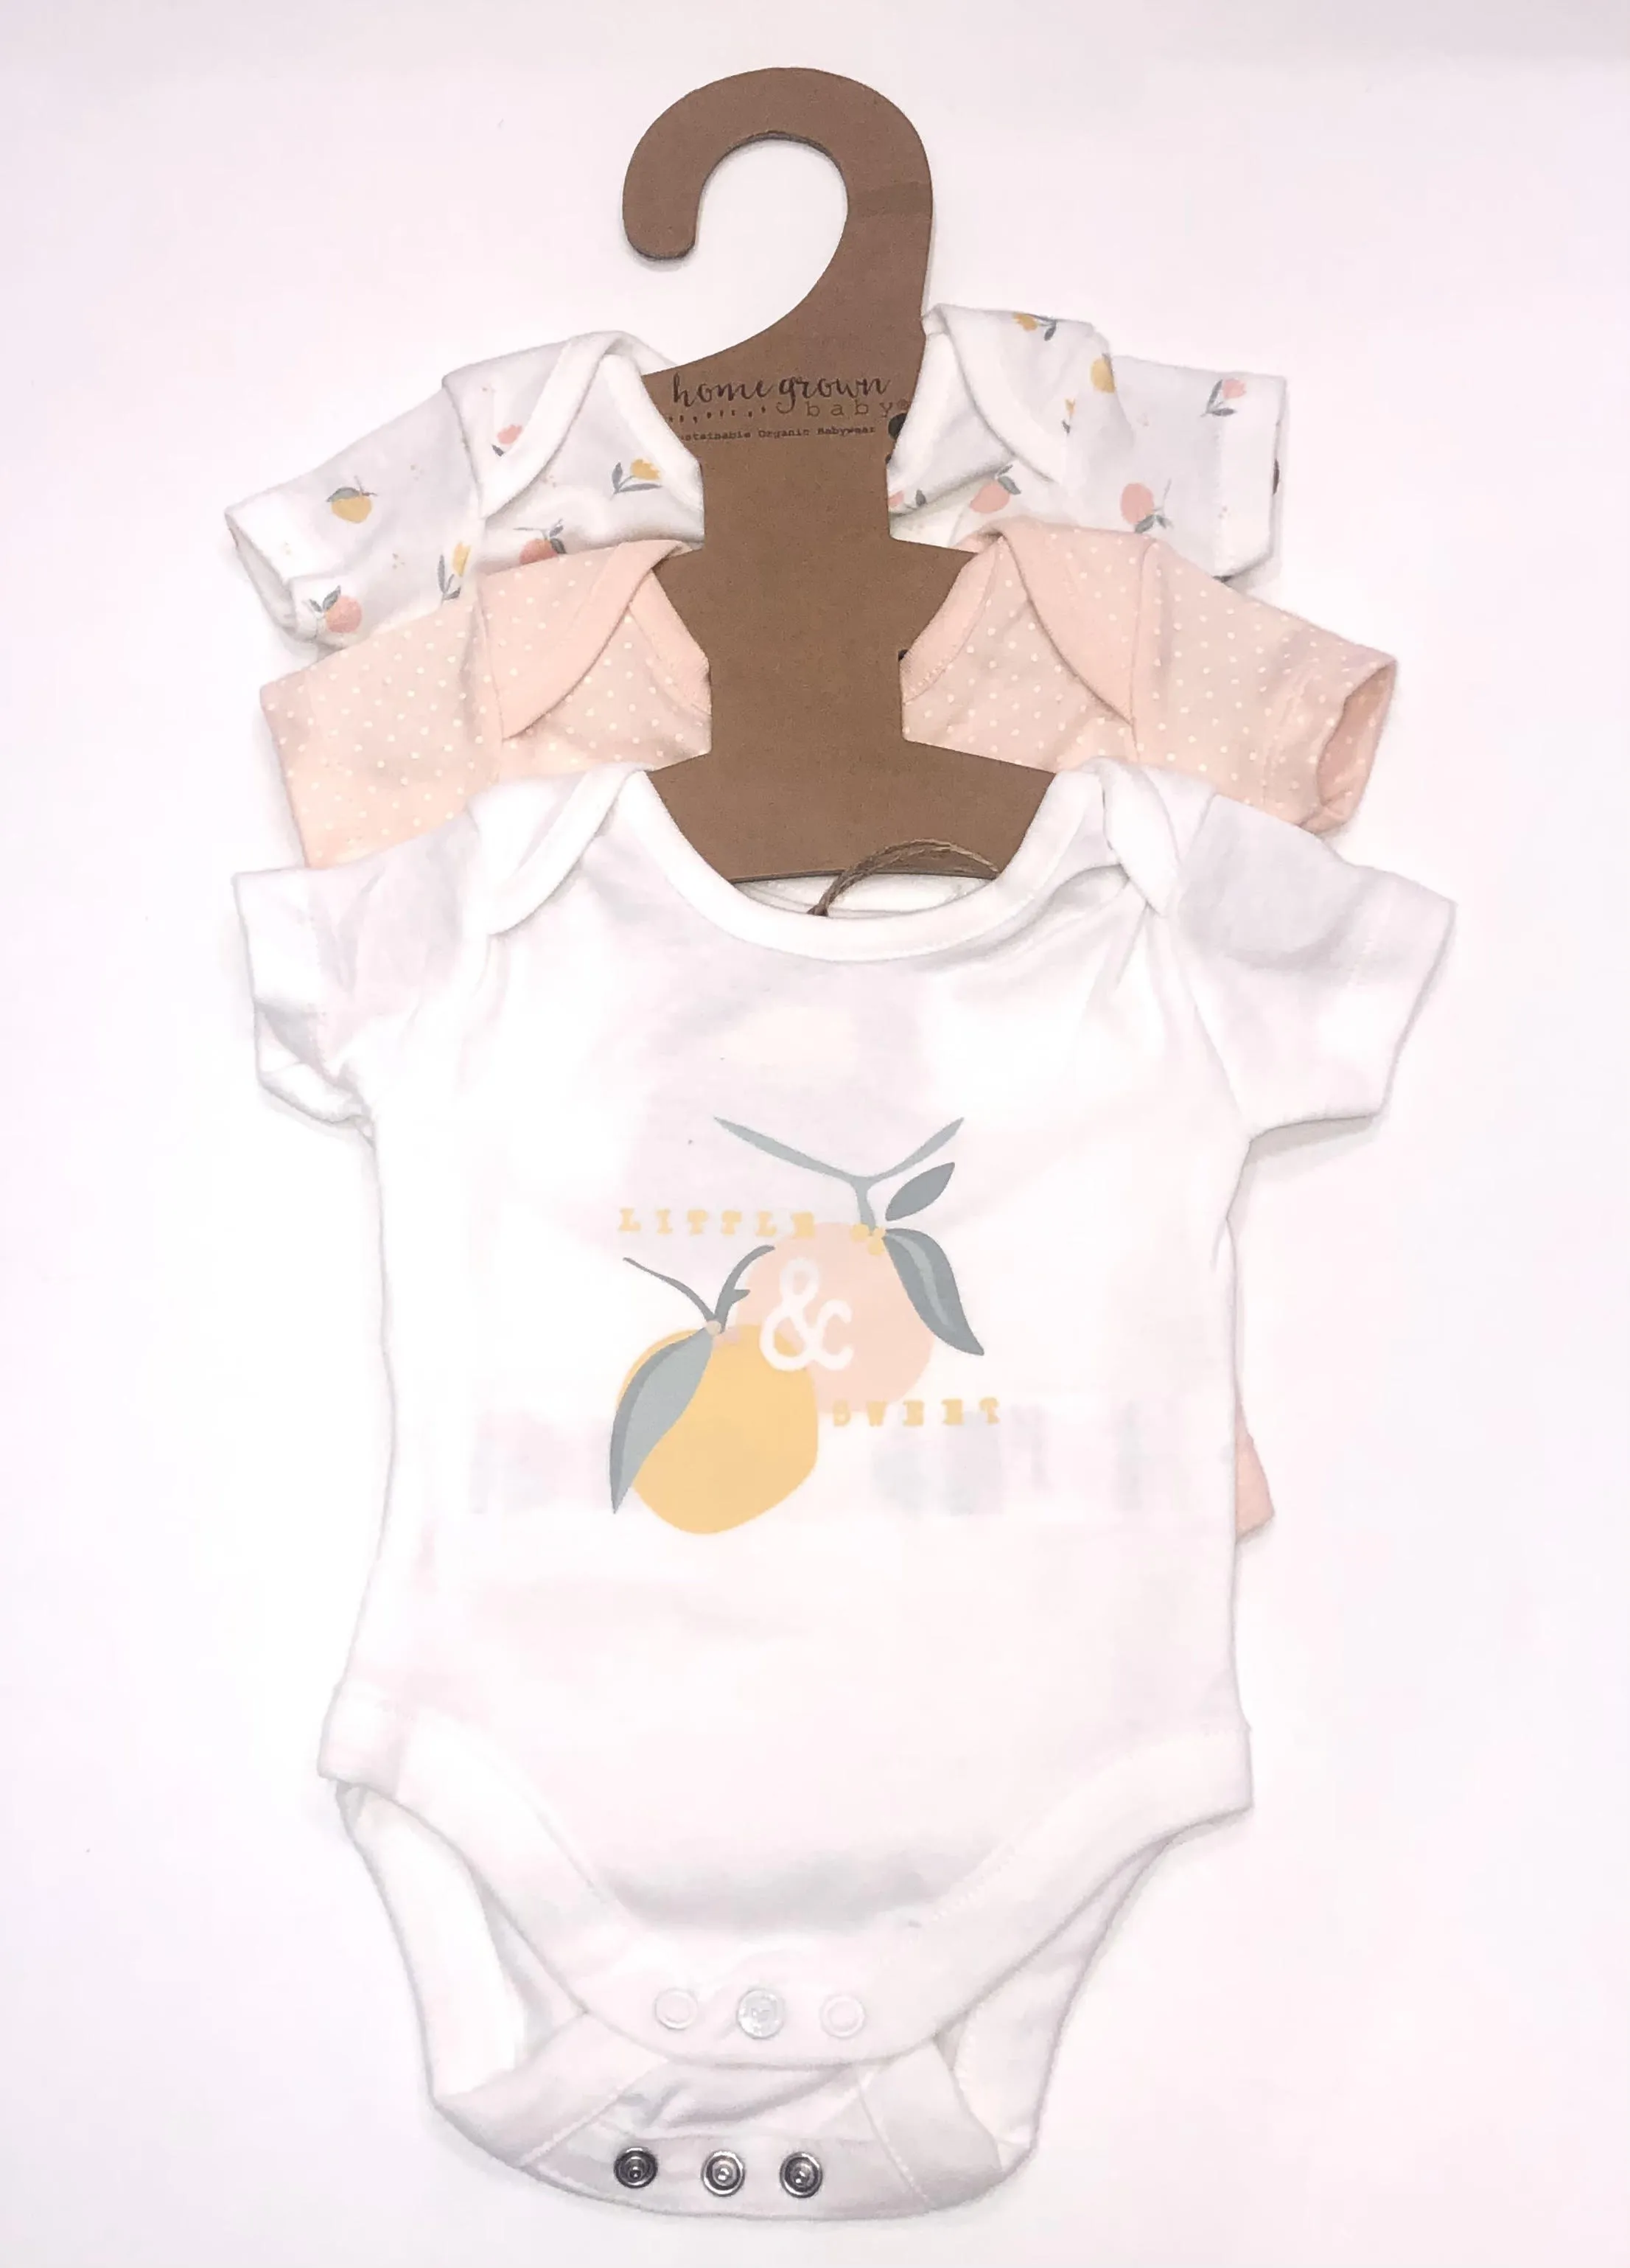 HOMEGROWN 3pck vests baby girls ss24 d07385